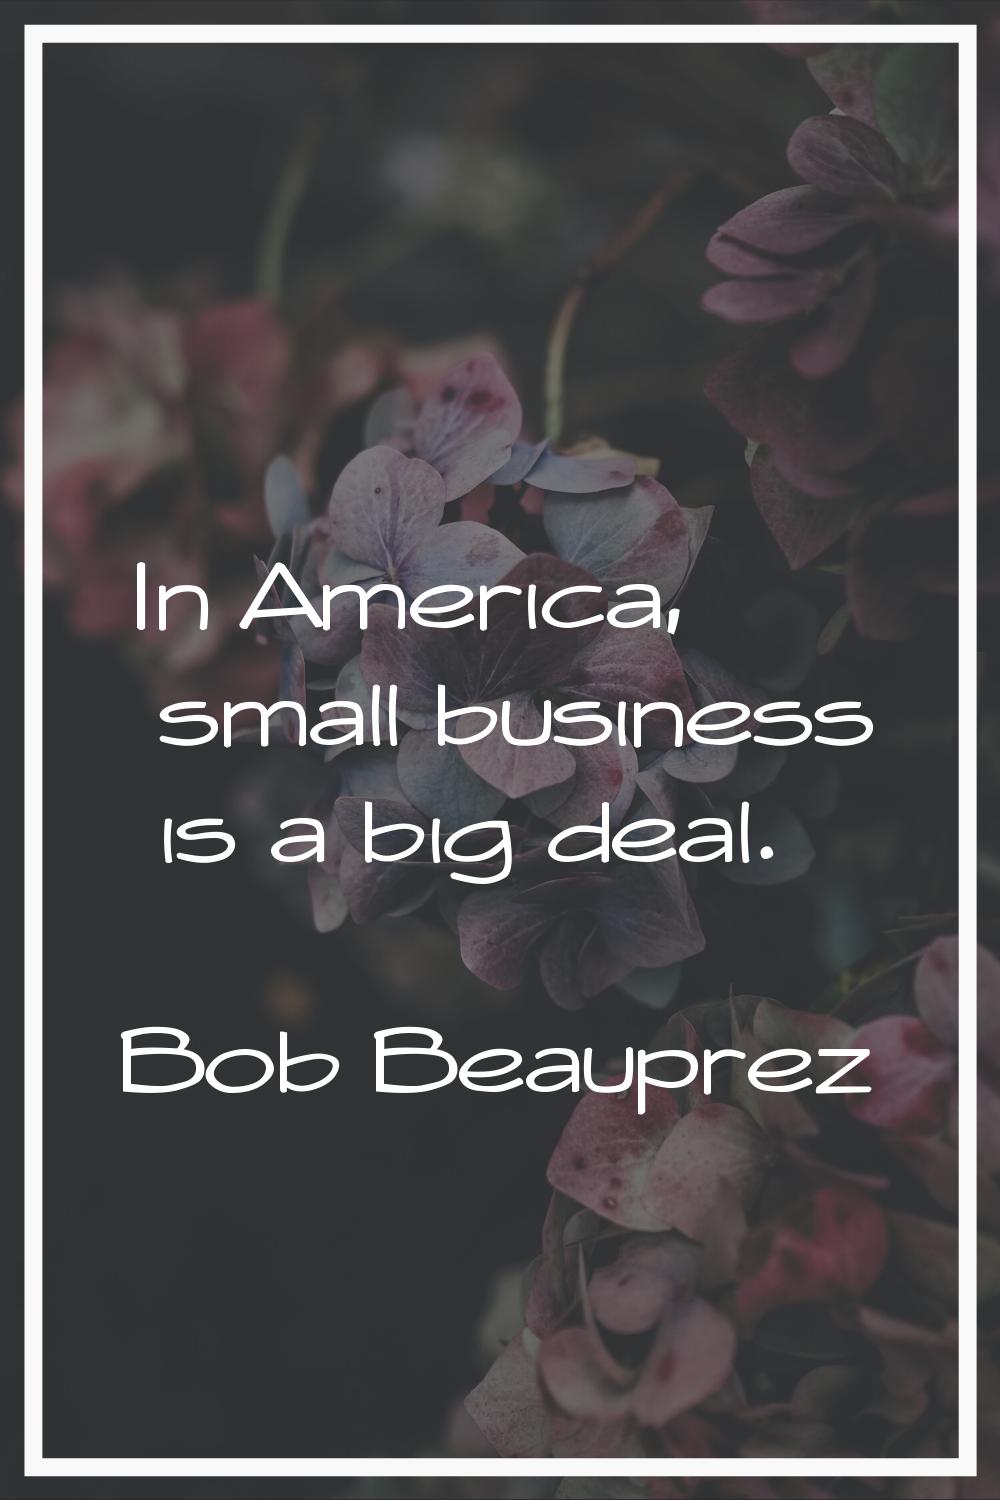 In America, small business is a big deal.